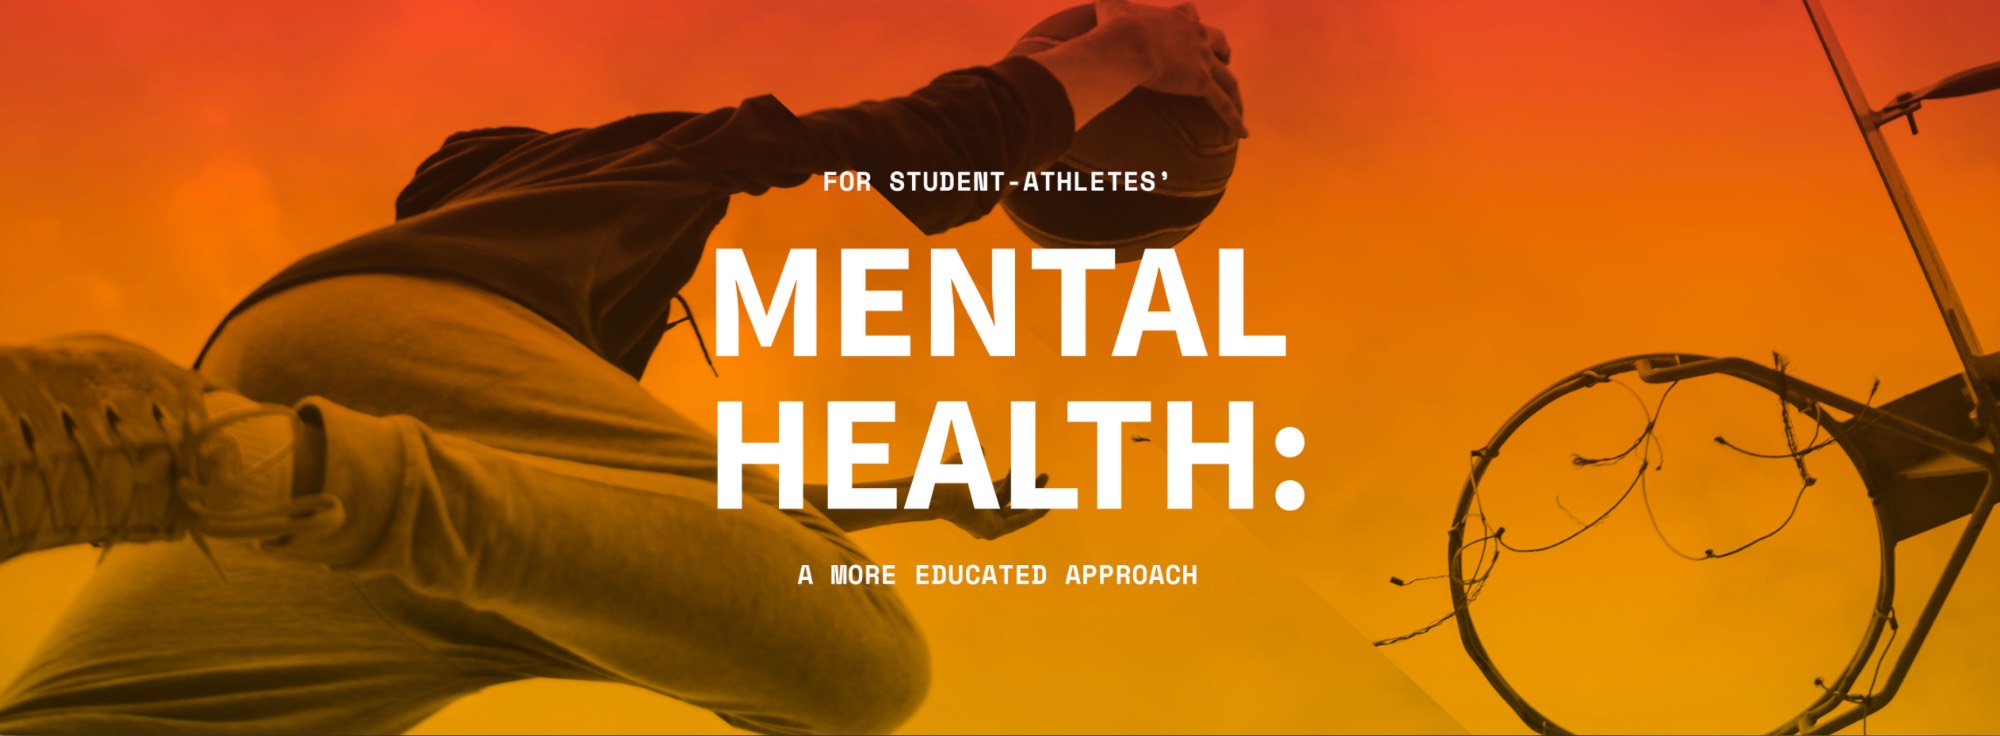 For Student Athletes' Mental Health: A More Educated Approach (The New York Times)